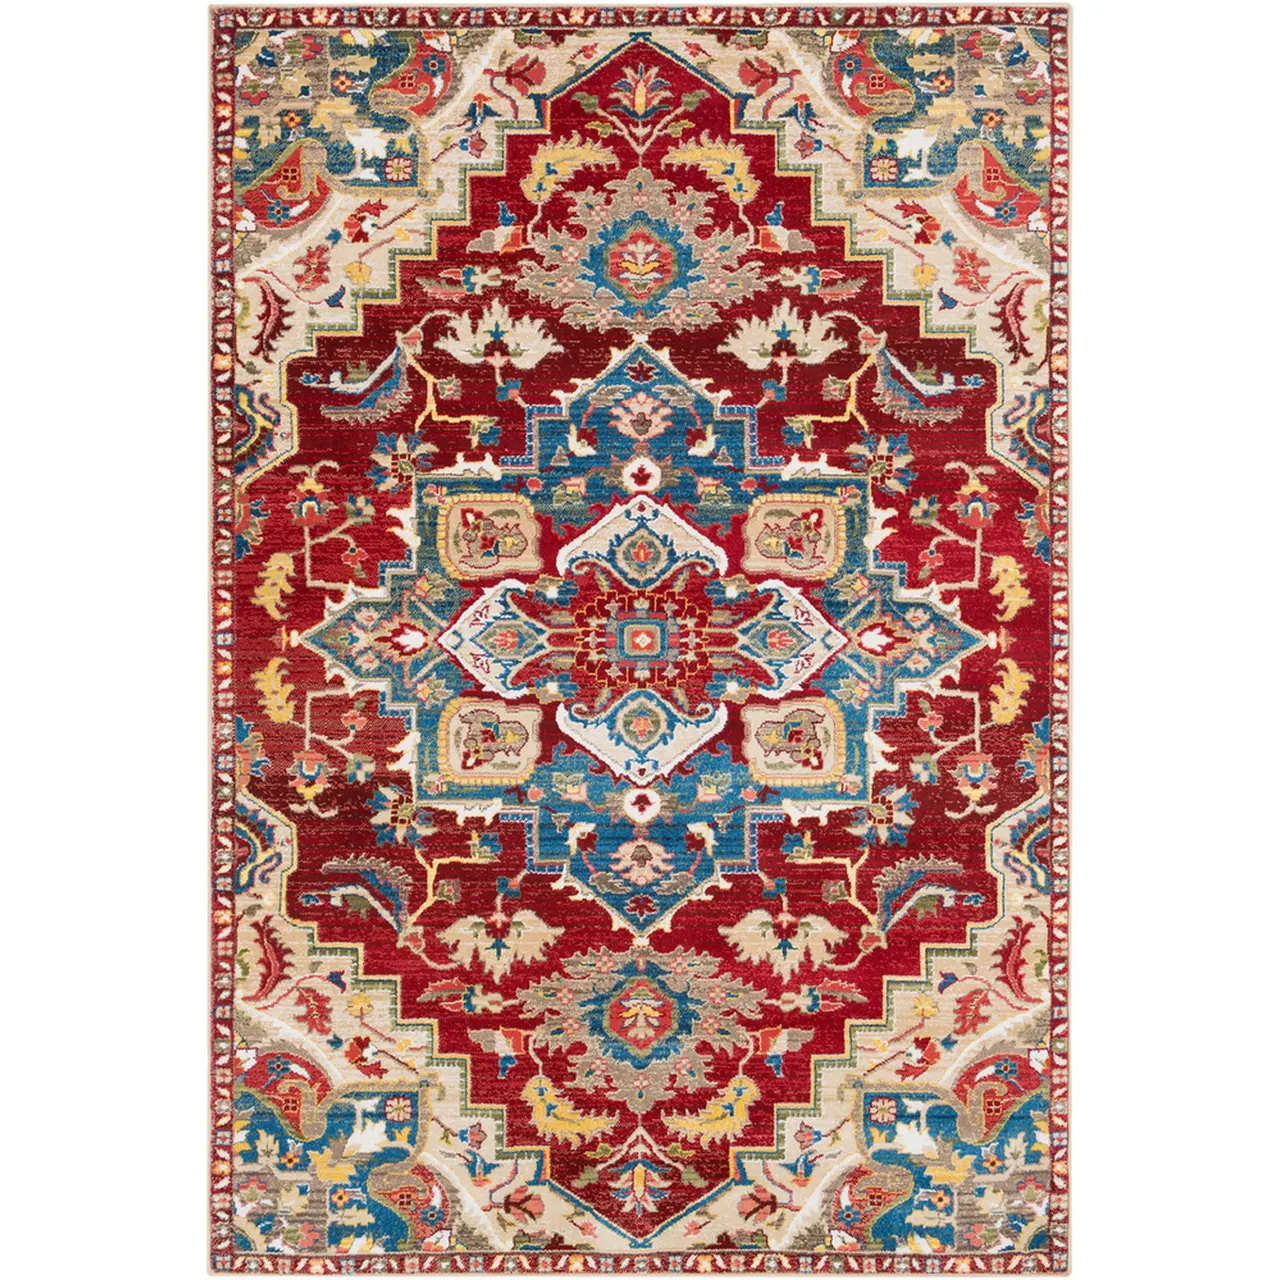 Good Quality Washable Boho Floor Carpets Wholesale Cotton Printed Dhurrie Made In India Living Room Kilim Area Rugs 5s7ft